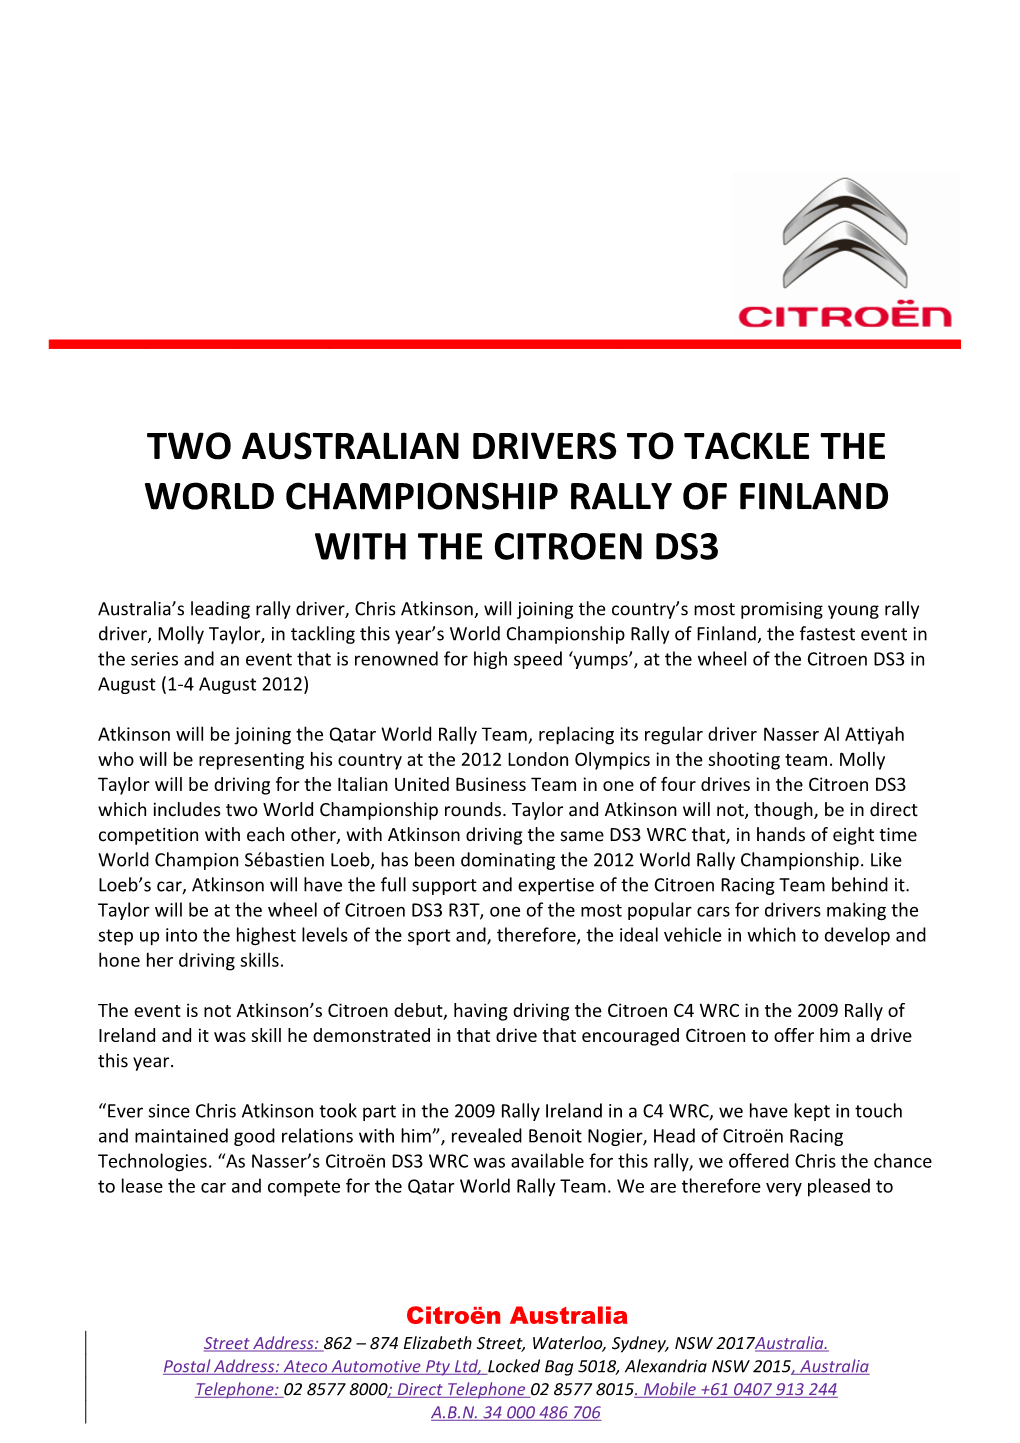 Two Australian Drivers to Tackle the World Championship Rally of Finland with the Citroen Ds3